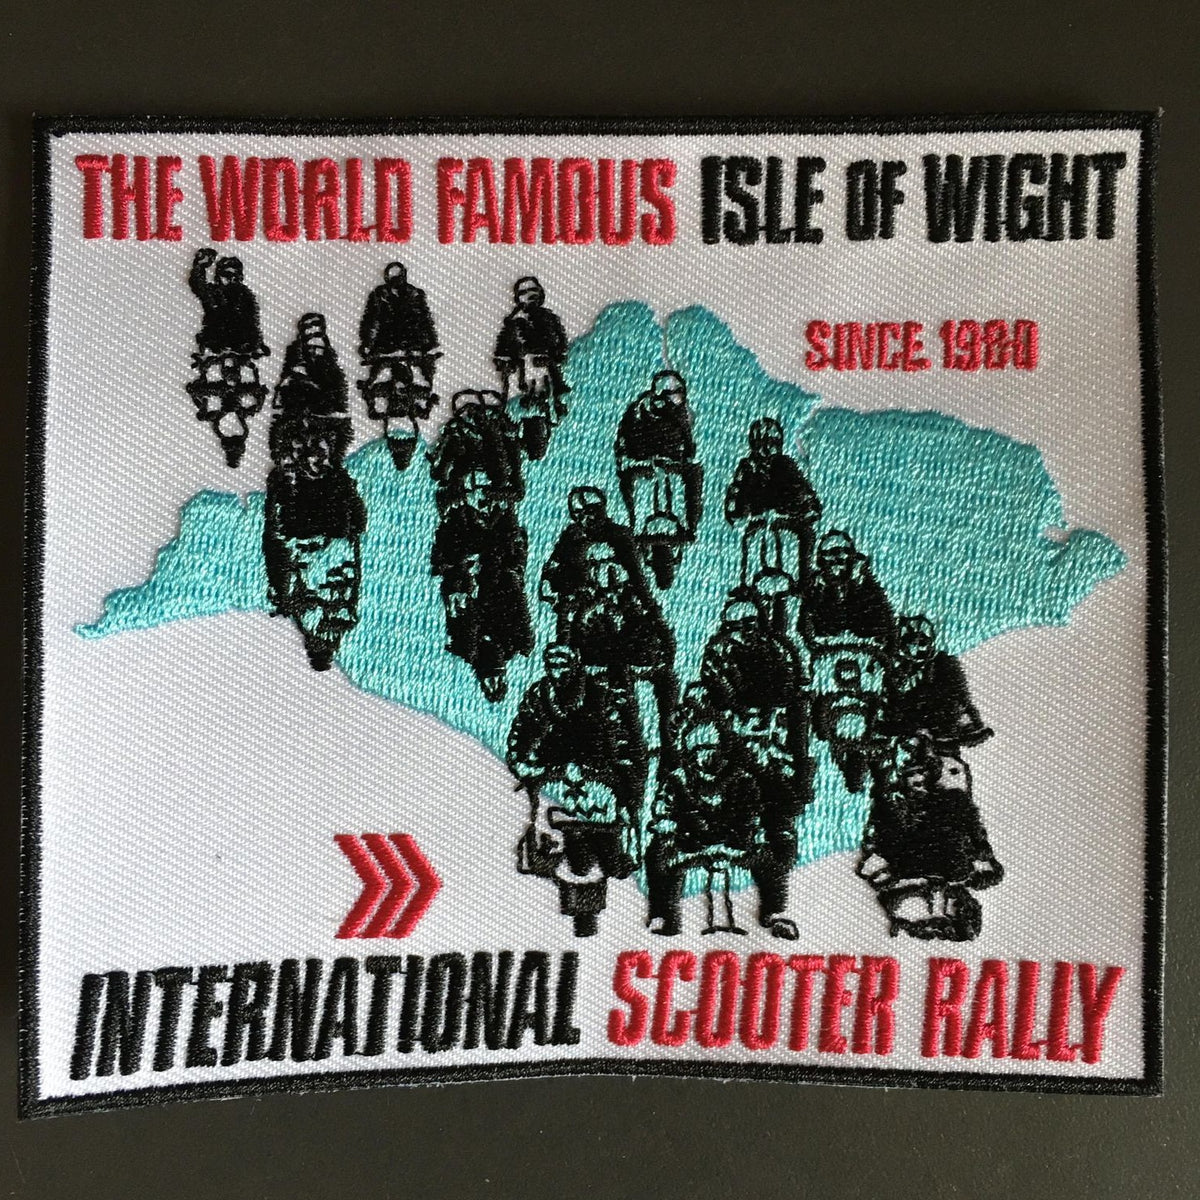 Isle of Wight International Scooter Rally Embroidered Patch